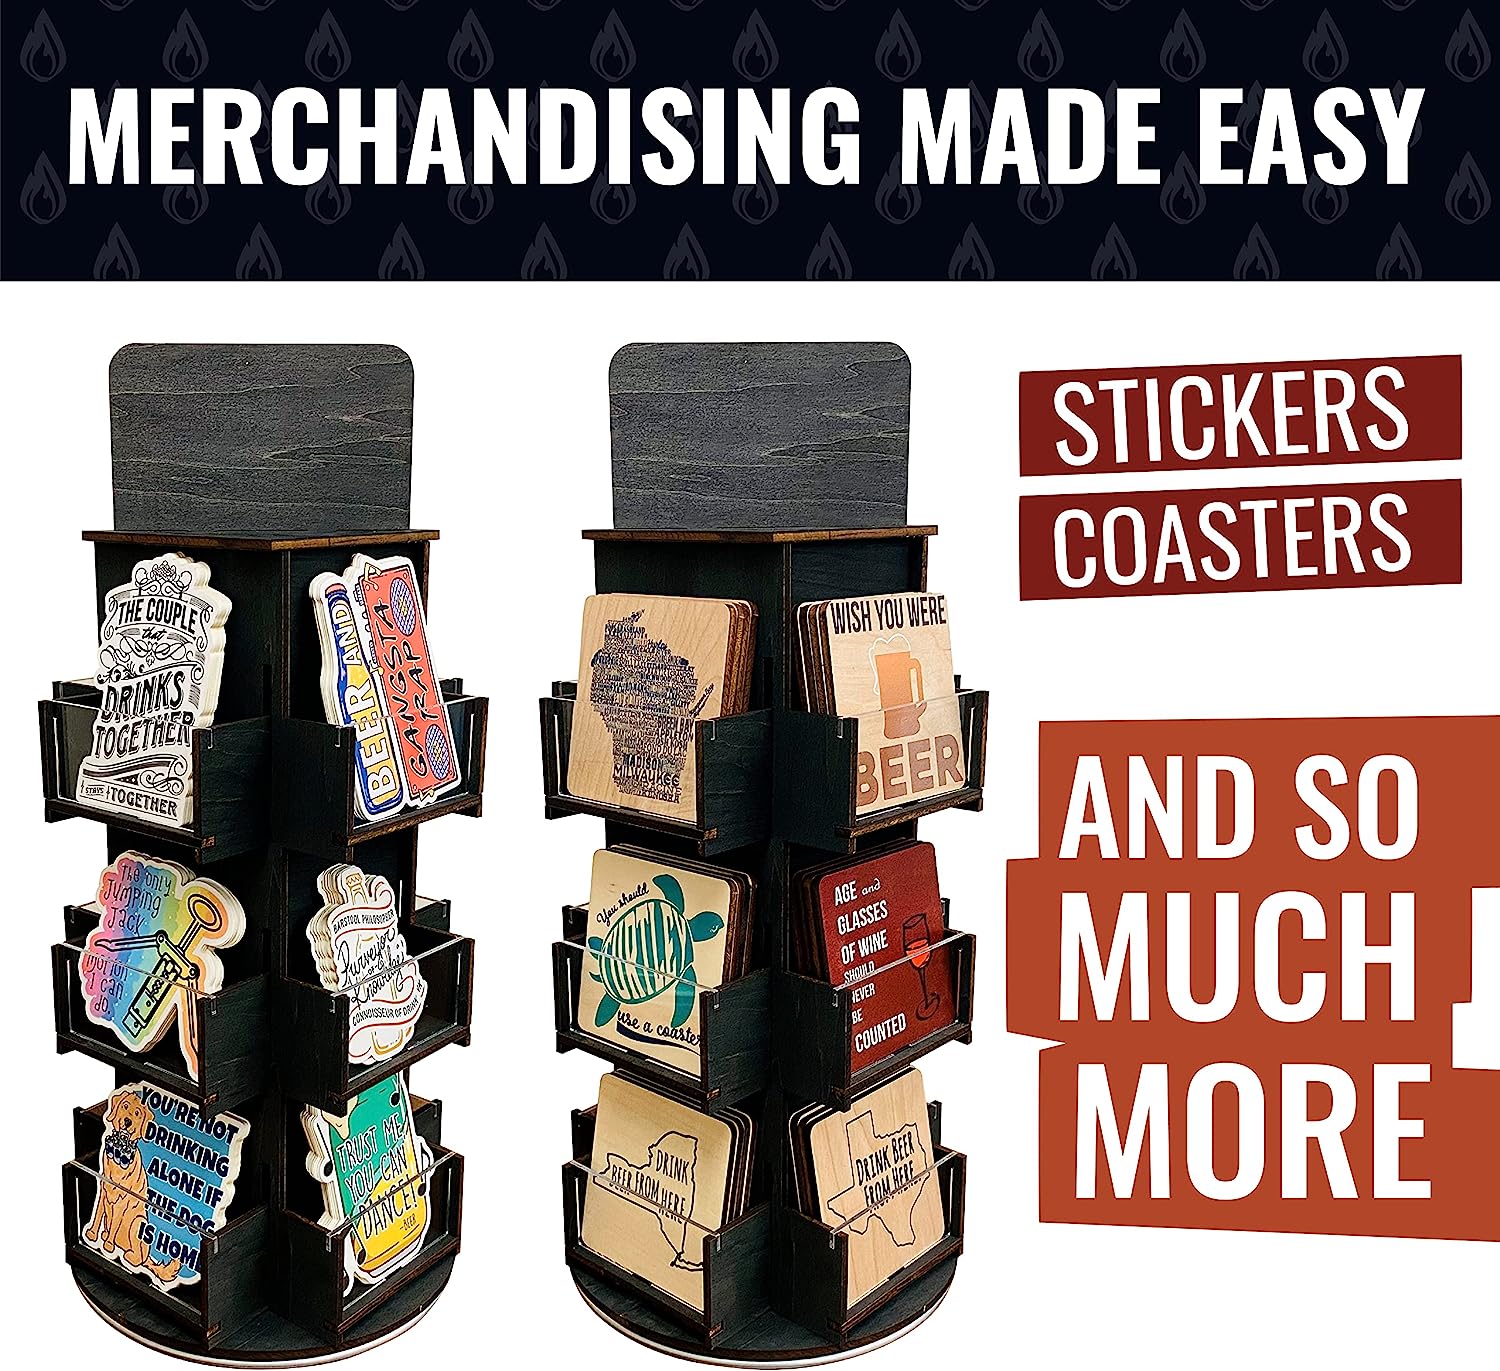 4-Sided Rotating Display Stand - Great for Stickers, Decals, Small Cards and More